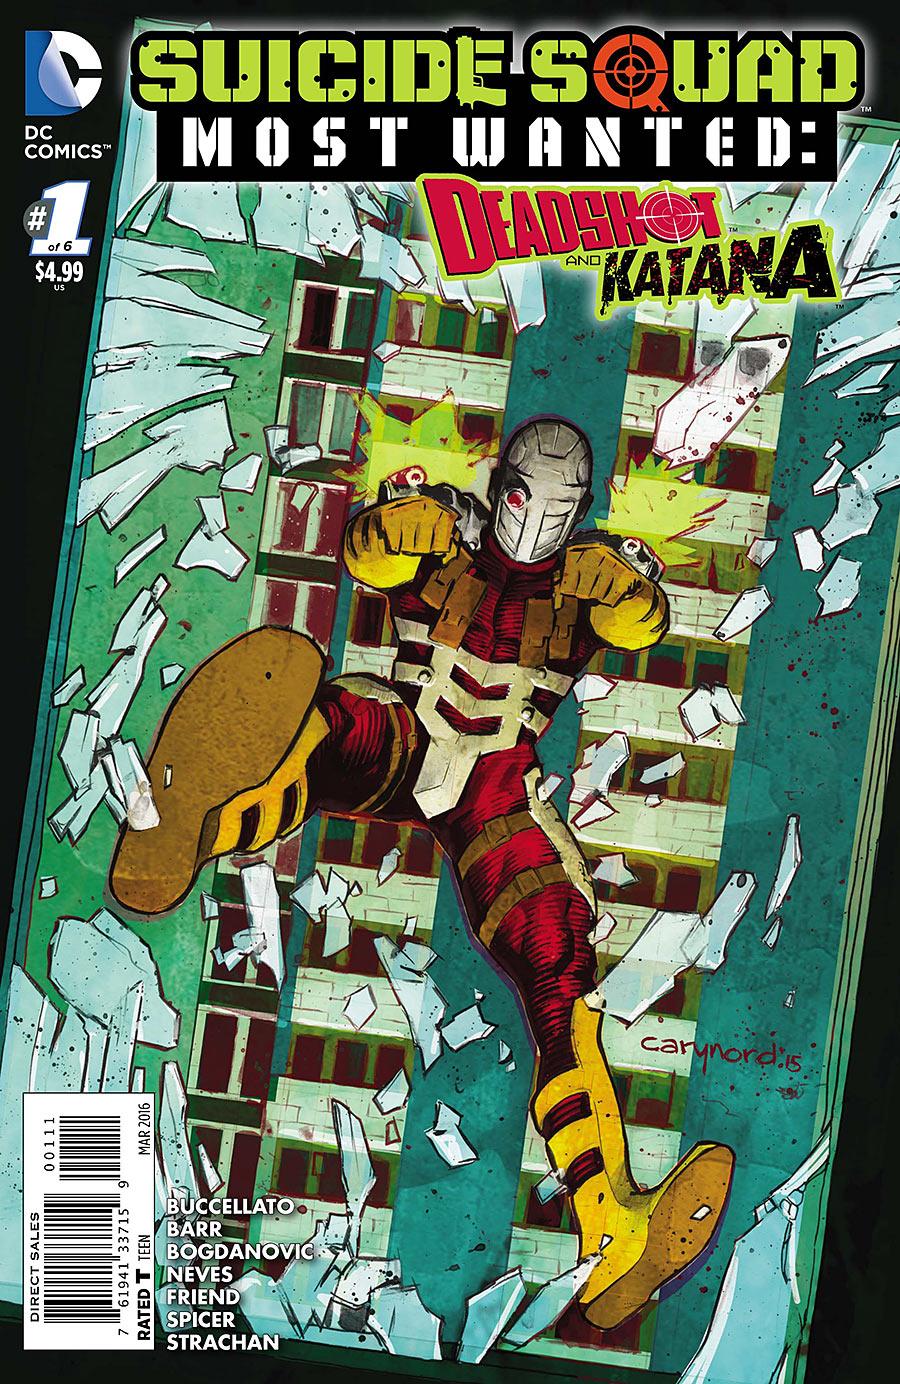 Suicide Squad Most Wanted: Deadshot and Katana Vol. 1 #1